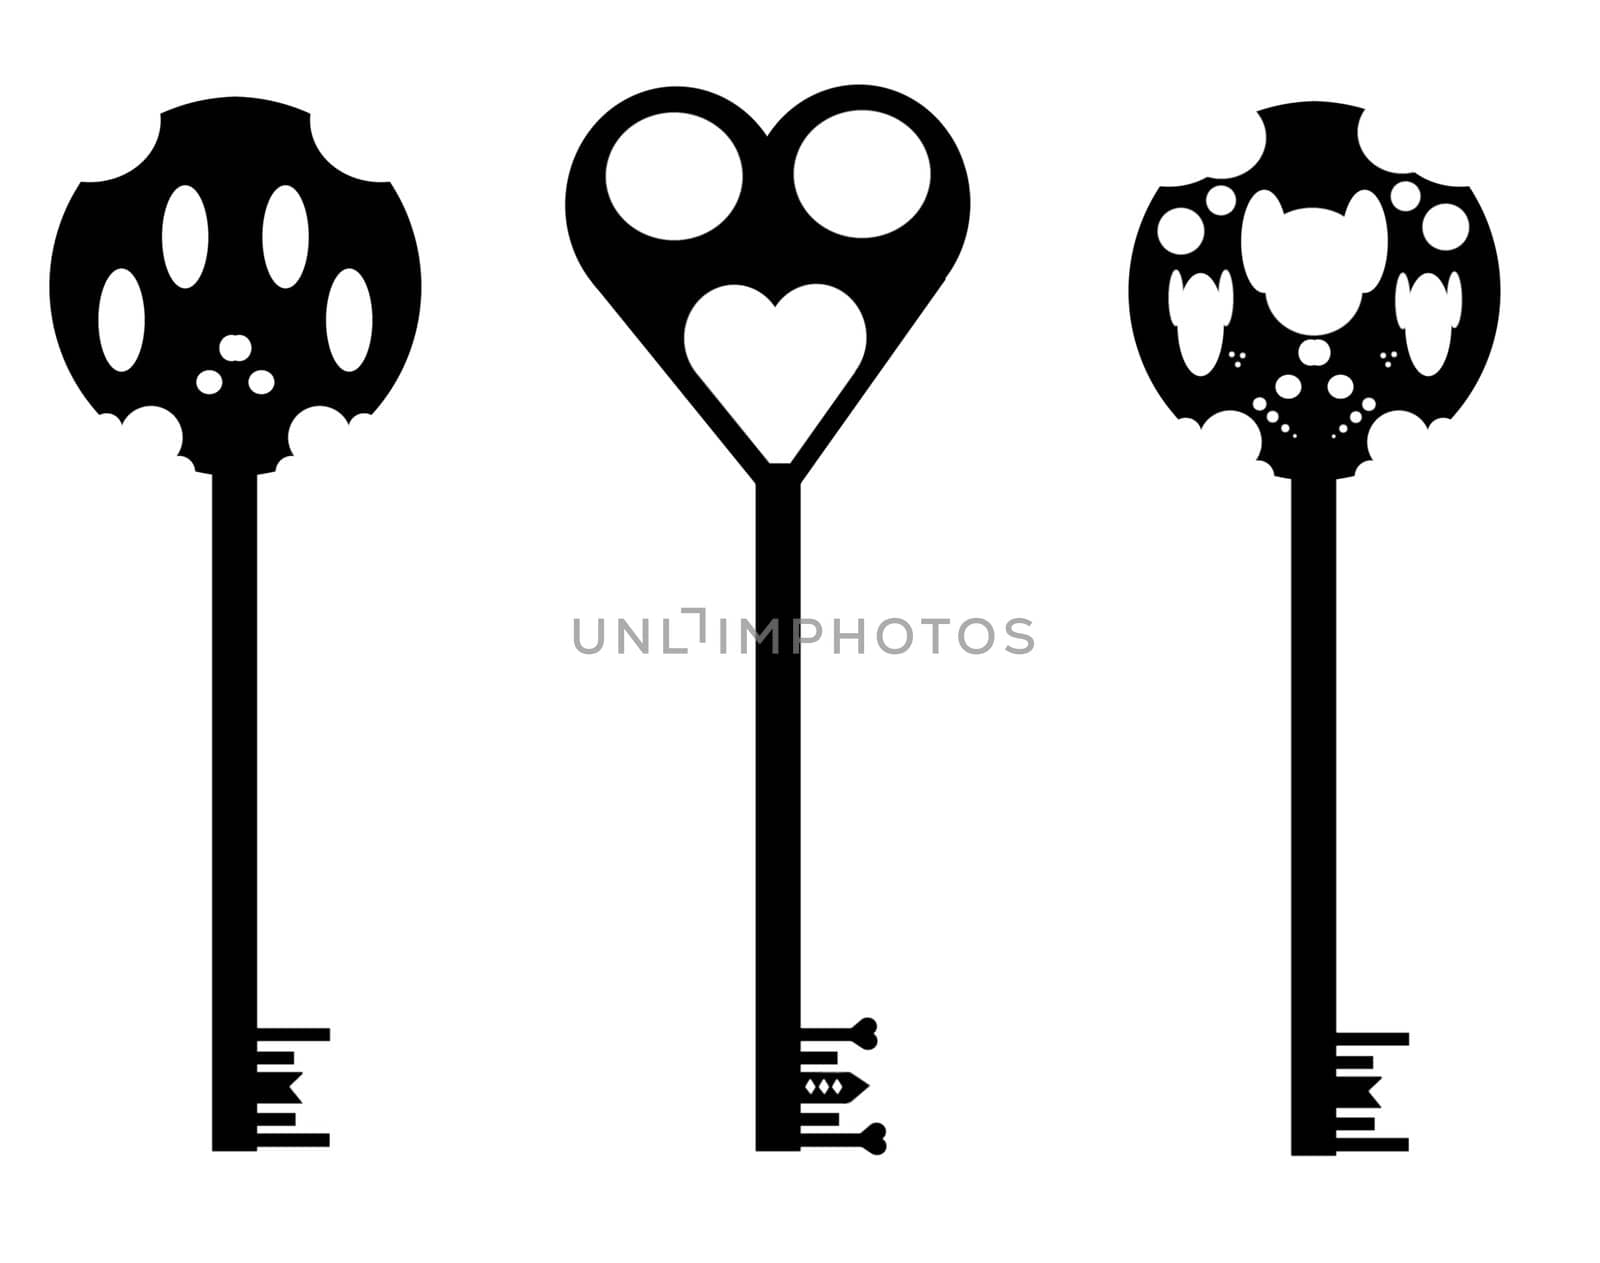 Illustration of three different silhouettes of keys, isolated against a white background.